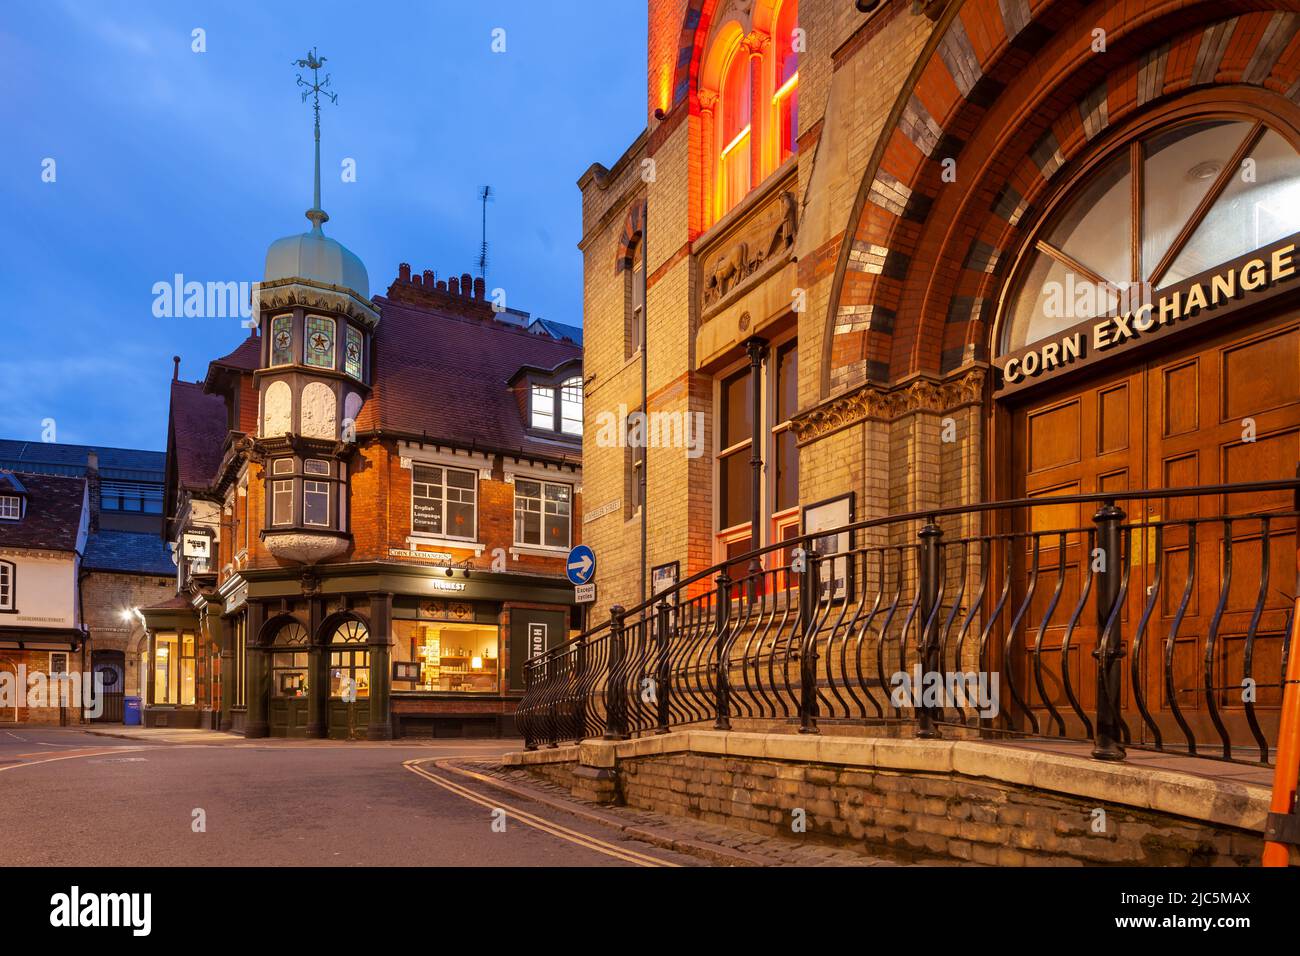 Evening at the Corn Exchange building in Cambridge city centre, England Stock Photo